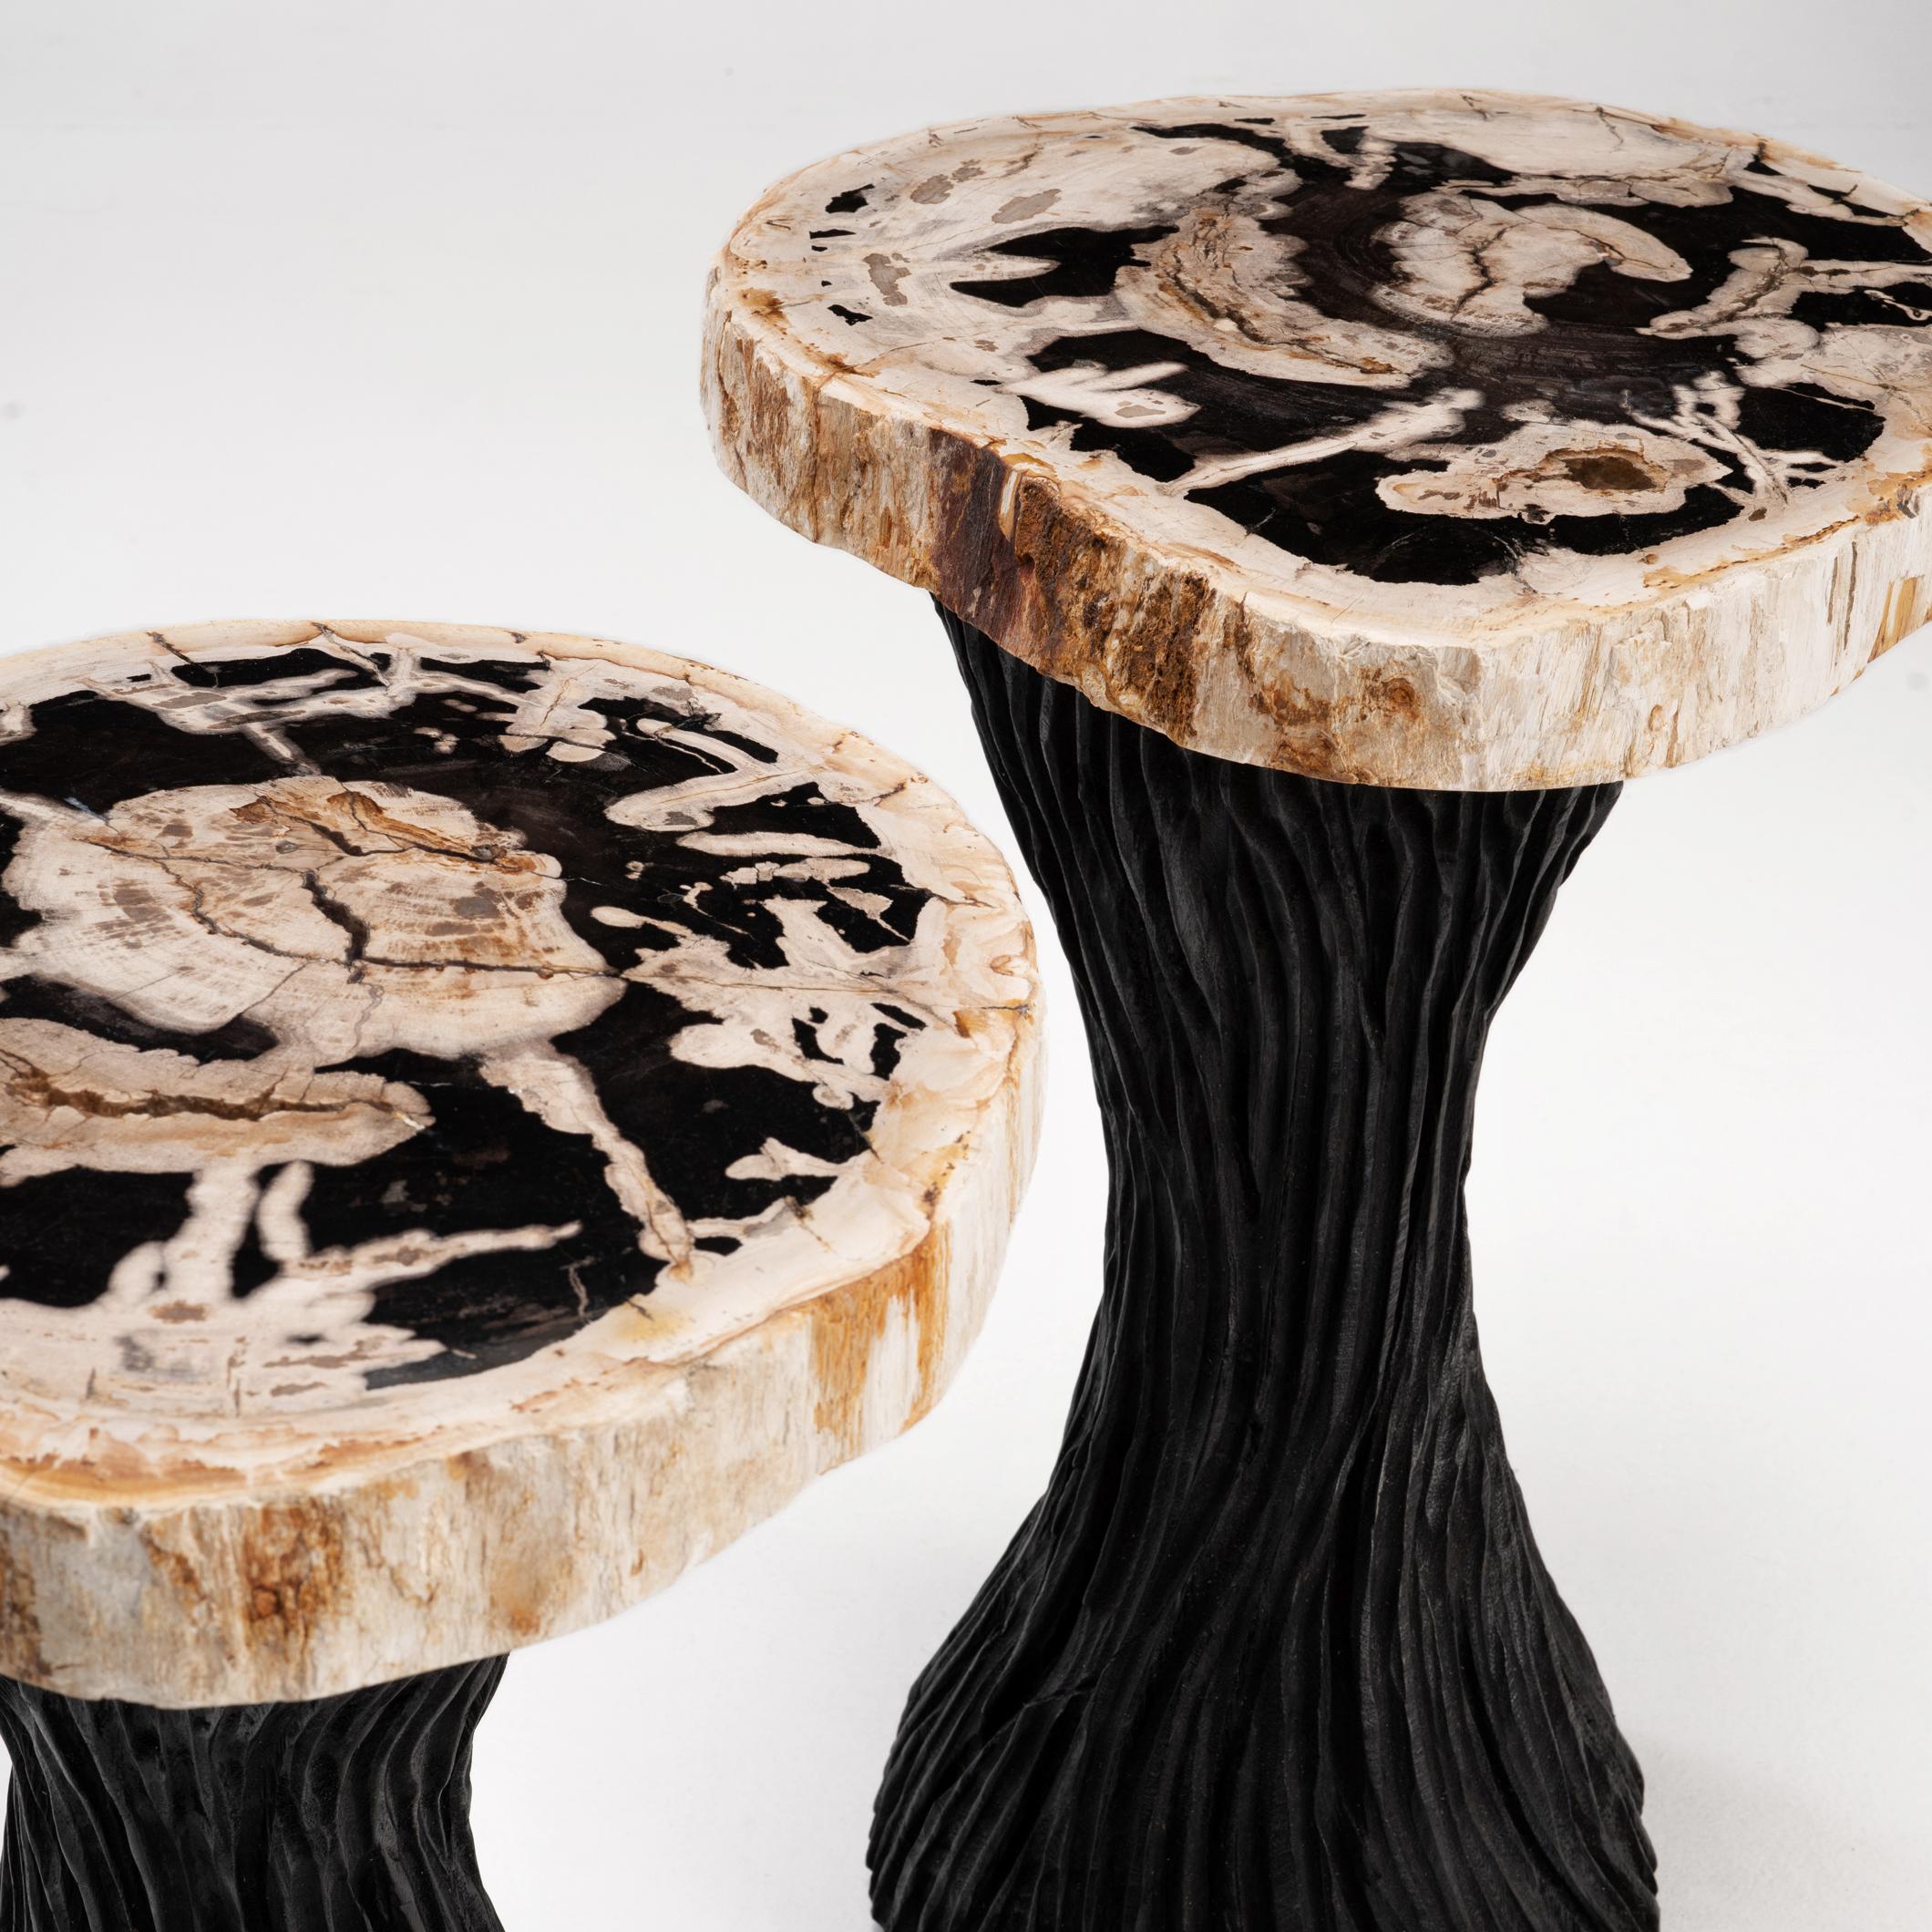 A twist of surrealism for your domestic fantasy. Meet ‘Twisted Fantasy’, an organic hand-sculpted spiral form side table. Carved from solid acacia and burnt using the traditional method of Shou Sugi Ban to enhance the natural grain and character of